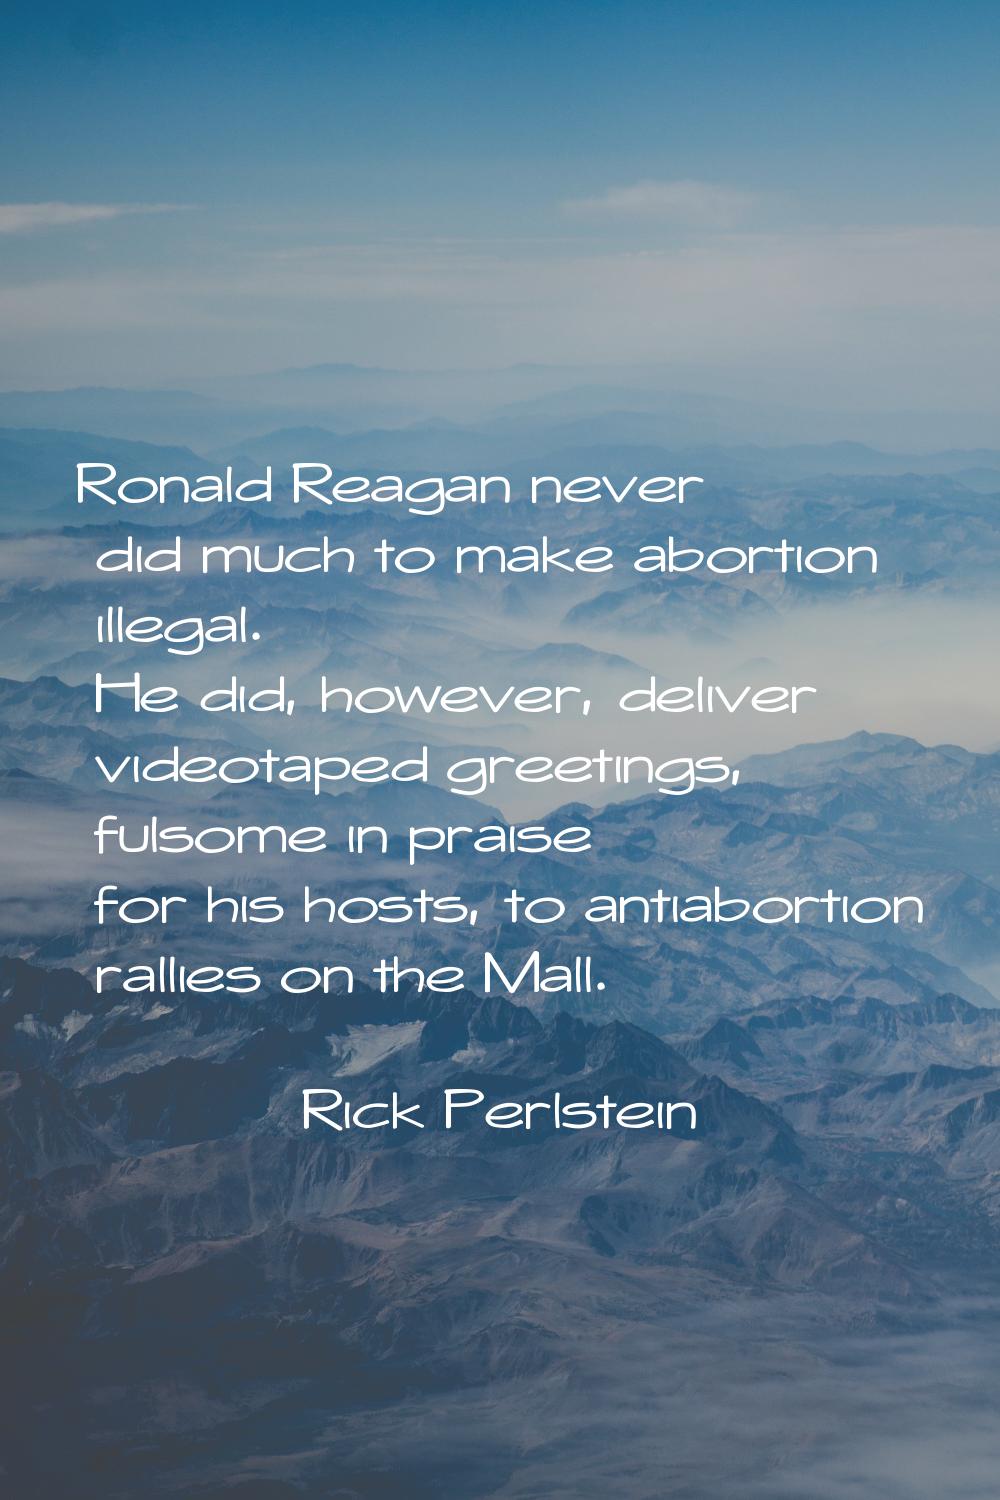 Ronald Reagan never did much to make abortion illegal. He did, however, deliver videotaped greeting